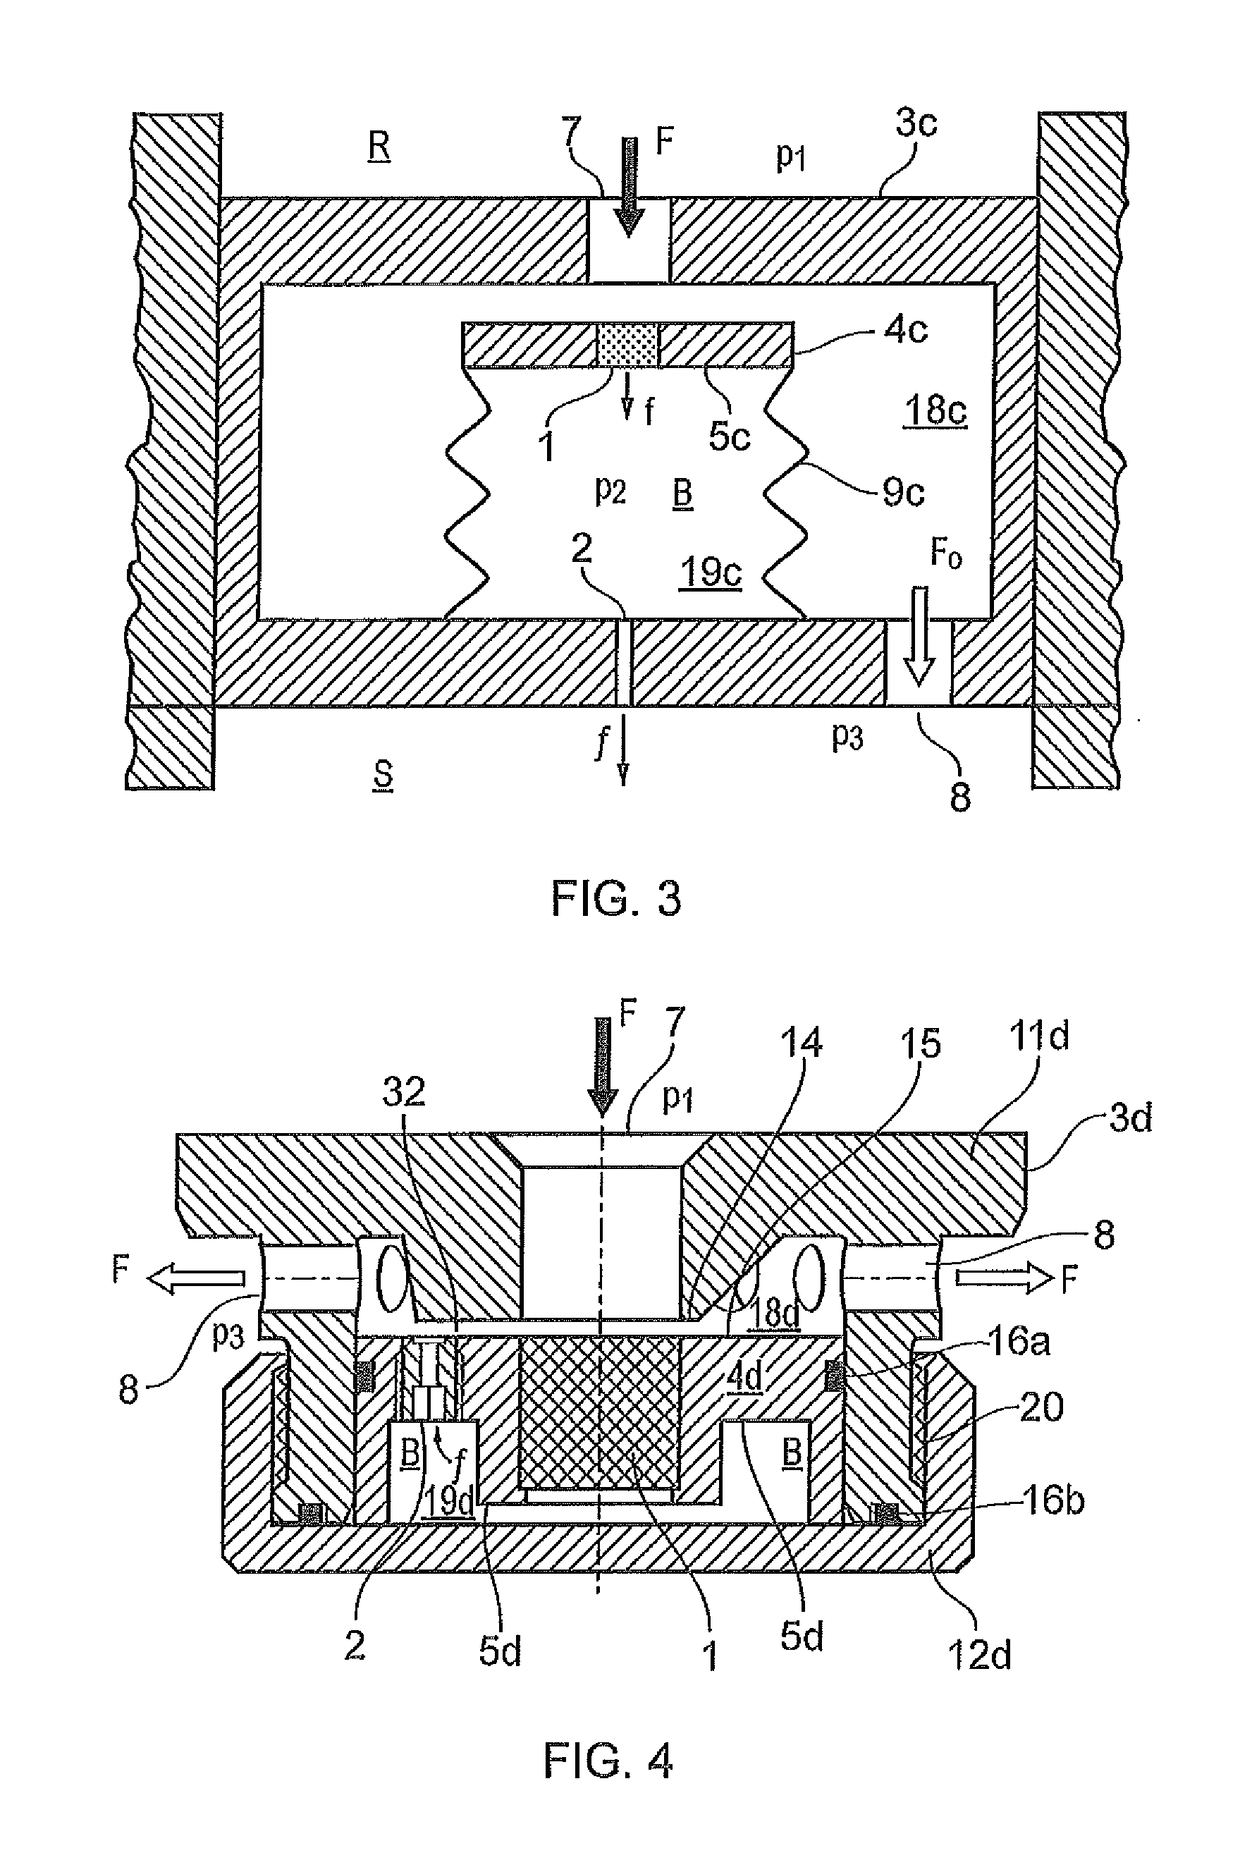 Flow control device and method